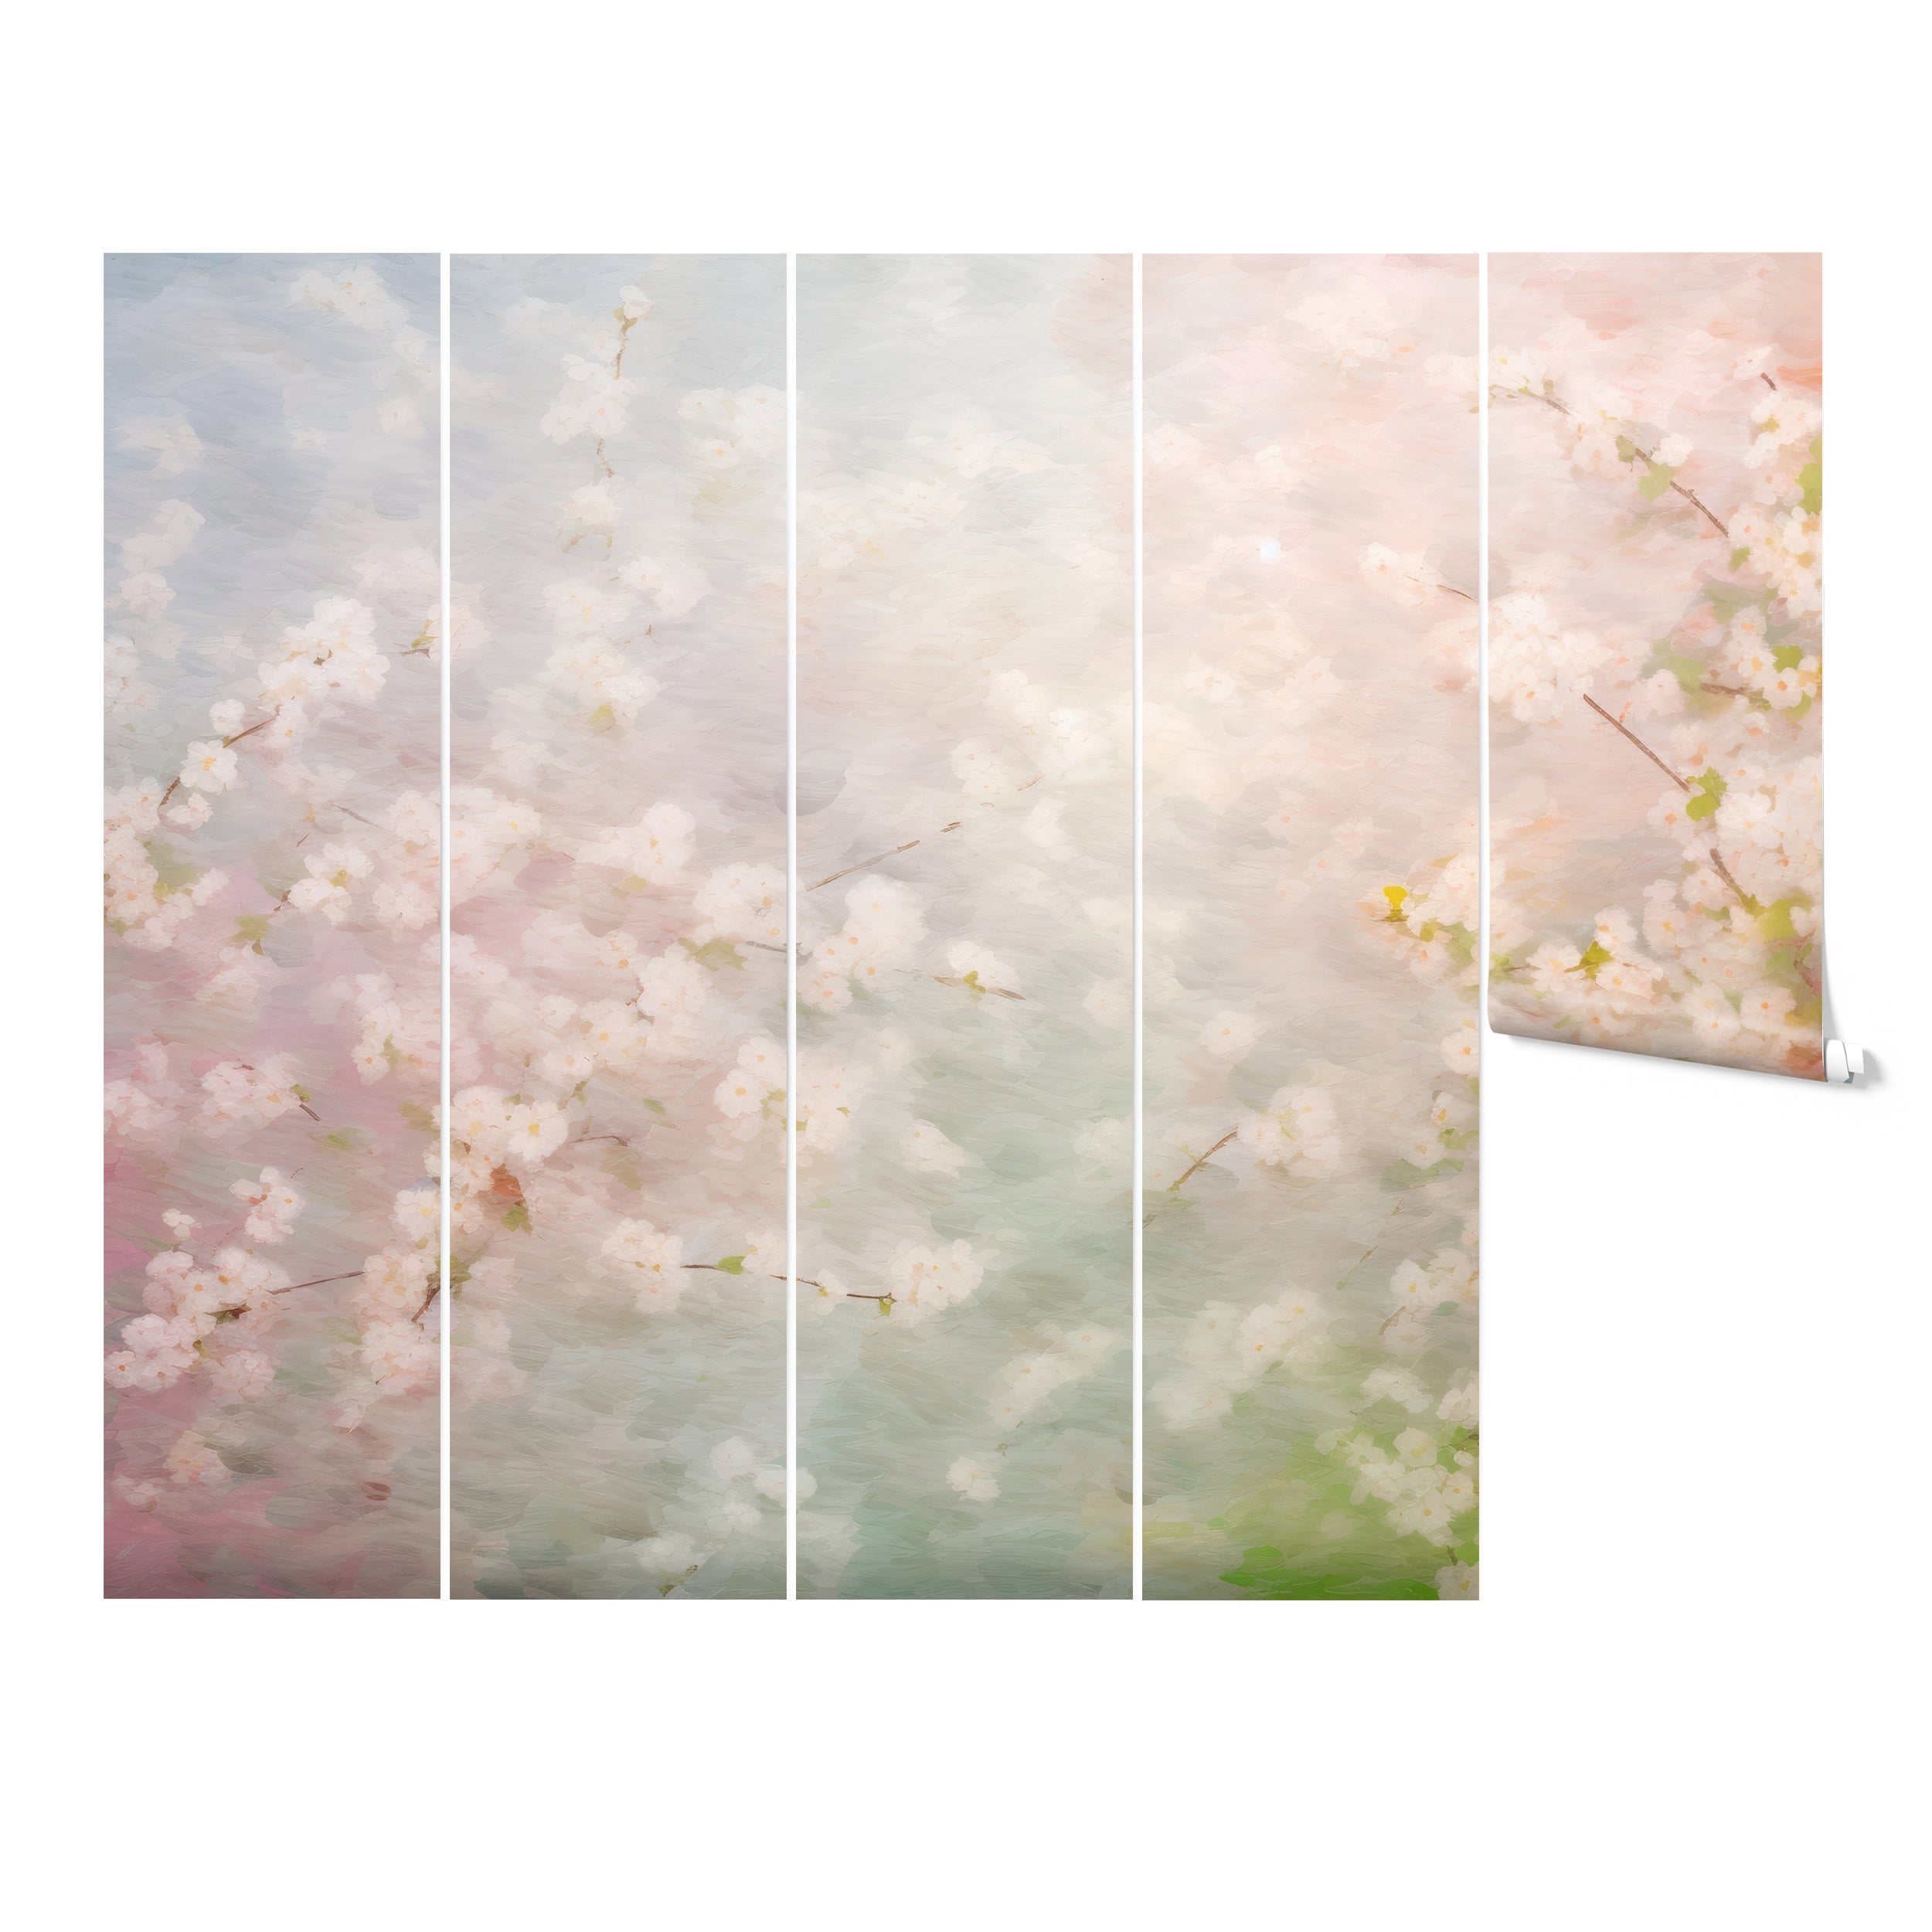 Segmented wall panels displaying a pastel cherry blossom mural in dreamy hues